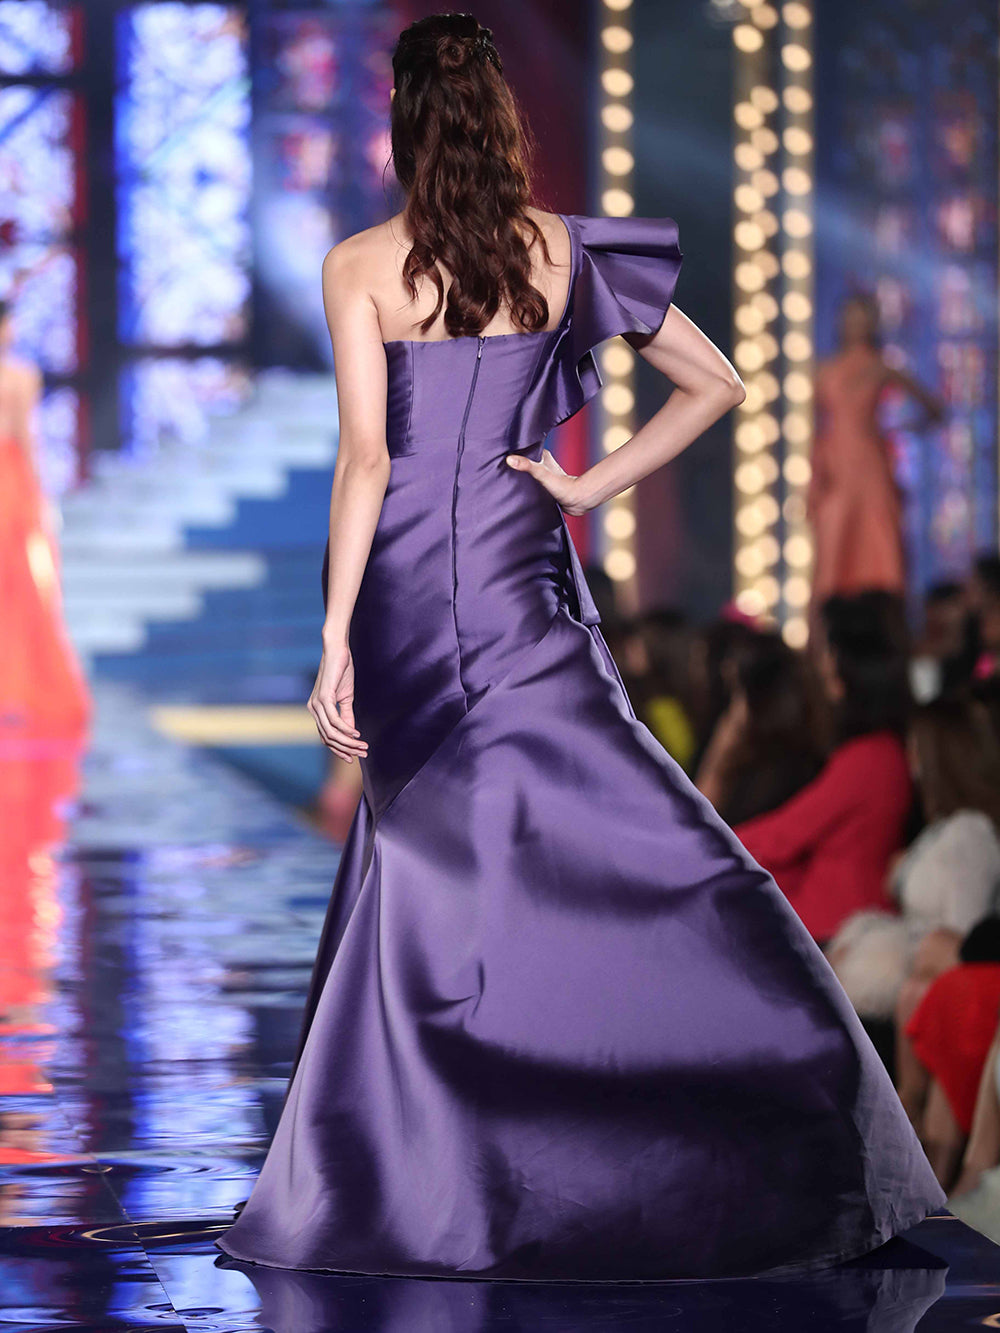 Ultraviolet Gown